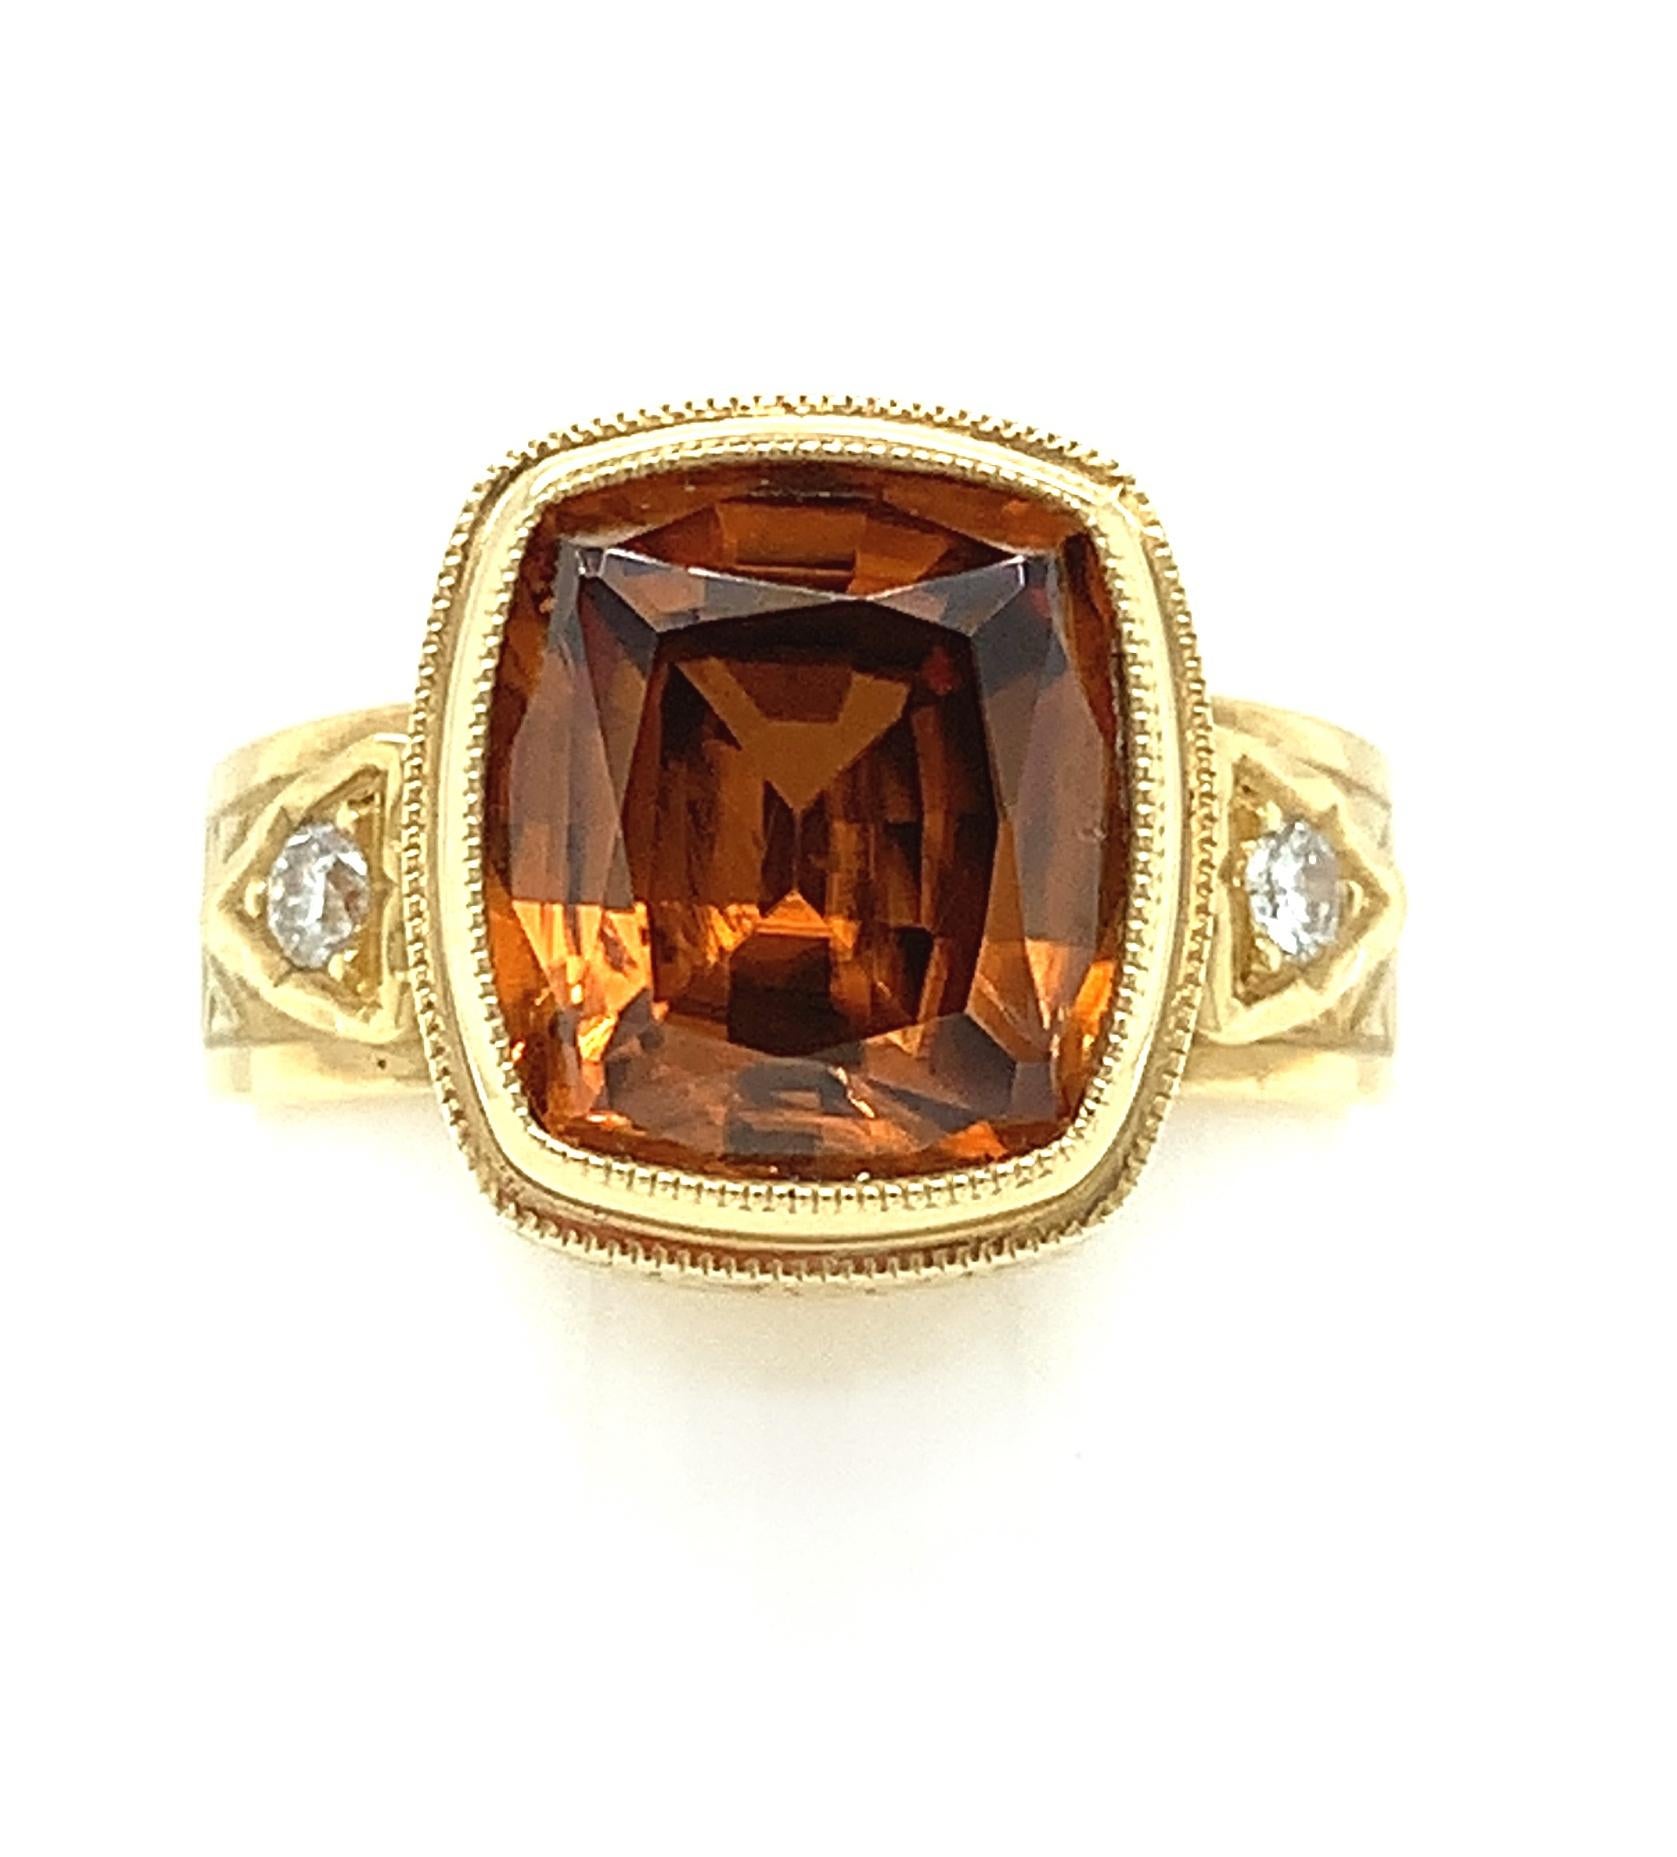 This meticulously detailed ring is a stunning statement piece! The warm tones of the vibrant, golden-orange zircon and the rich 18k yellow gold bezel are reminiscent of a sunset. The wide band complements the cushion shape of the zircon, and